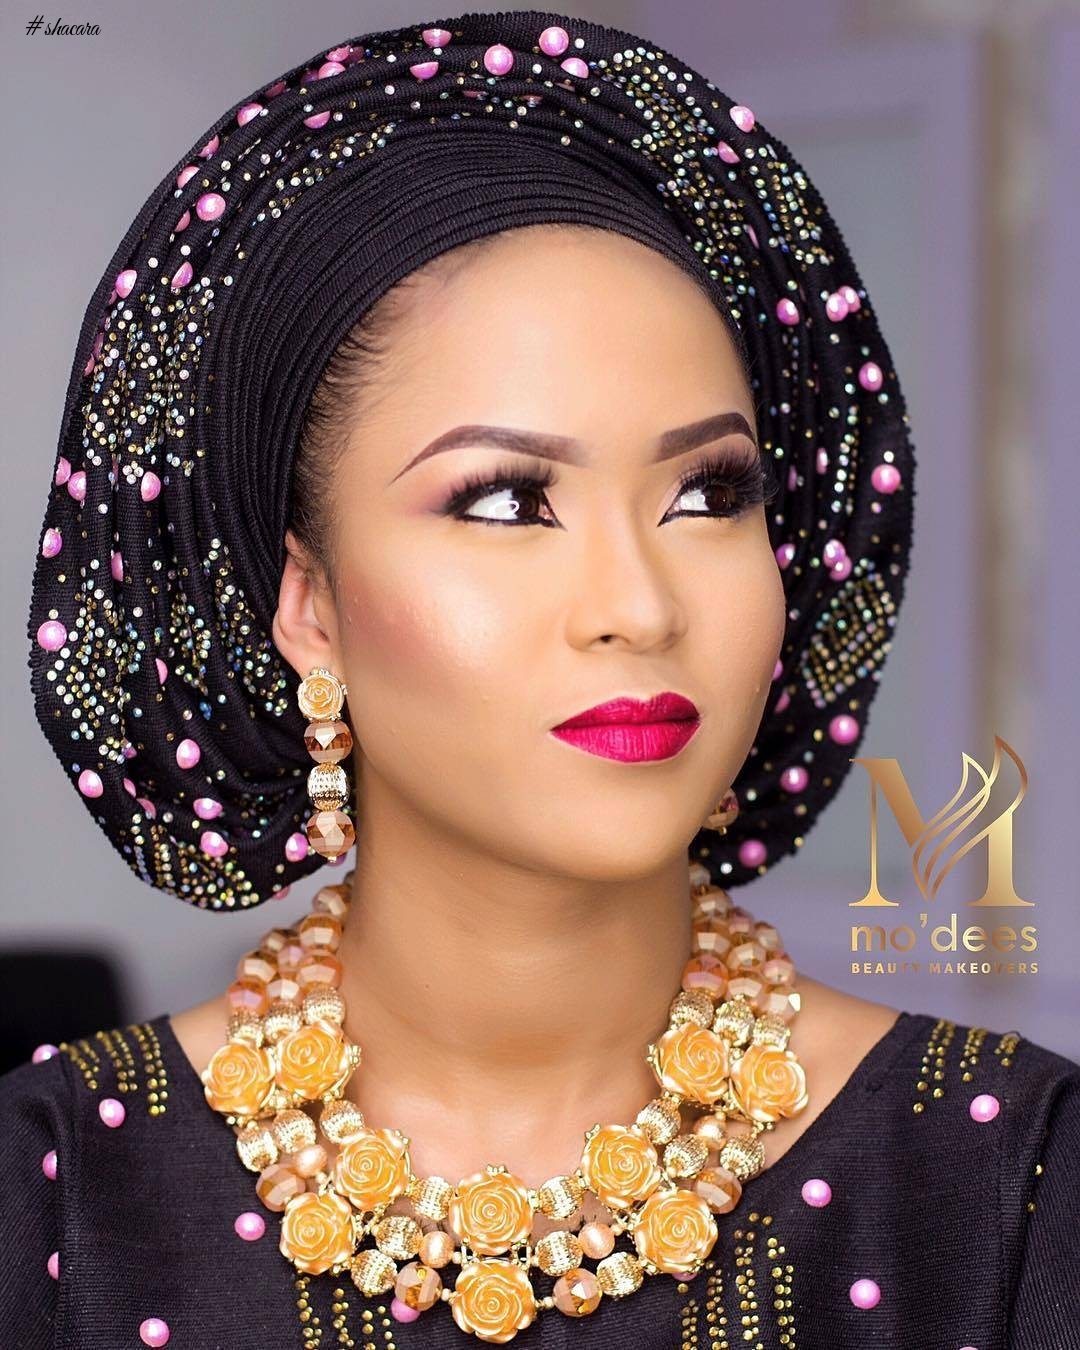 GELE IN PICTURES